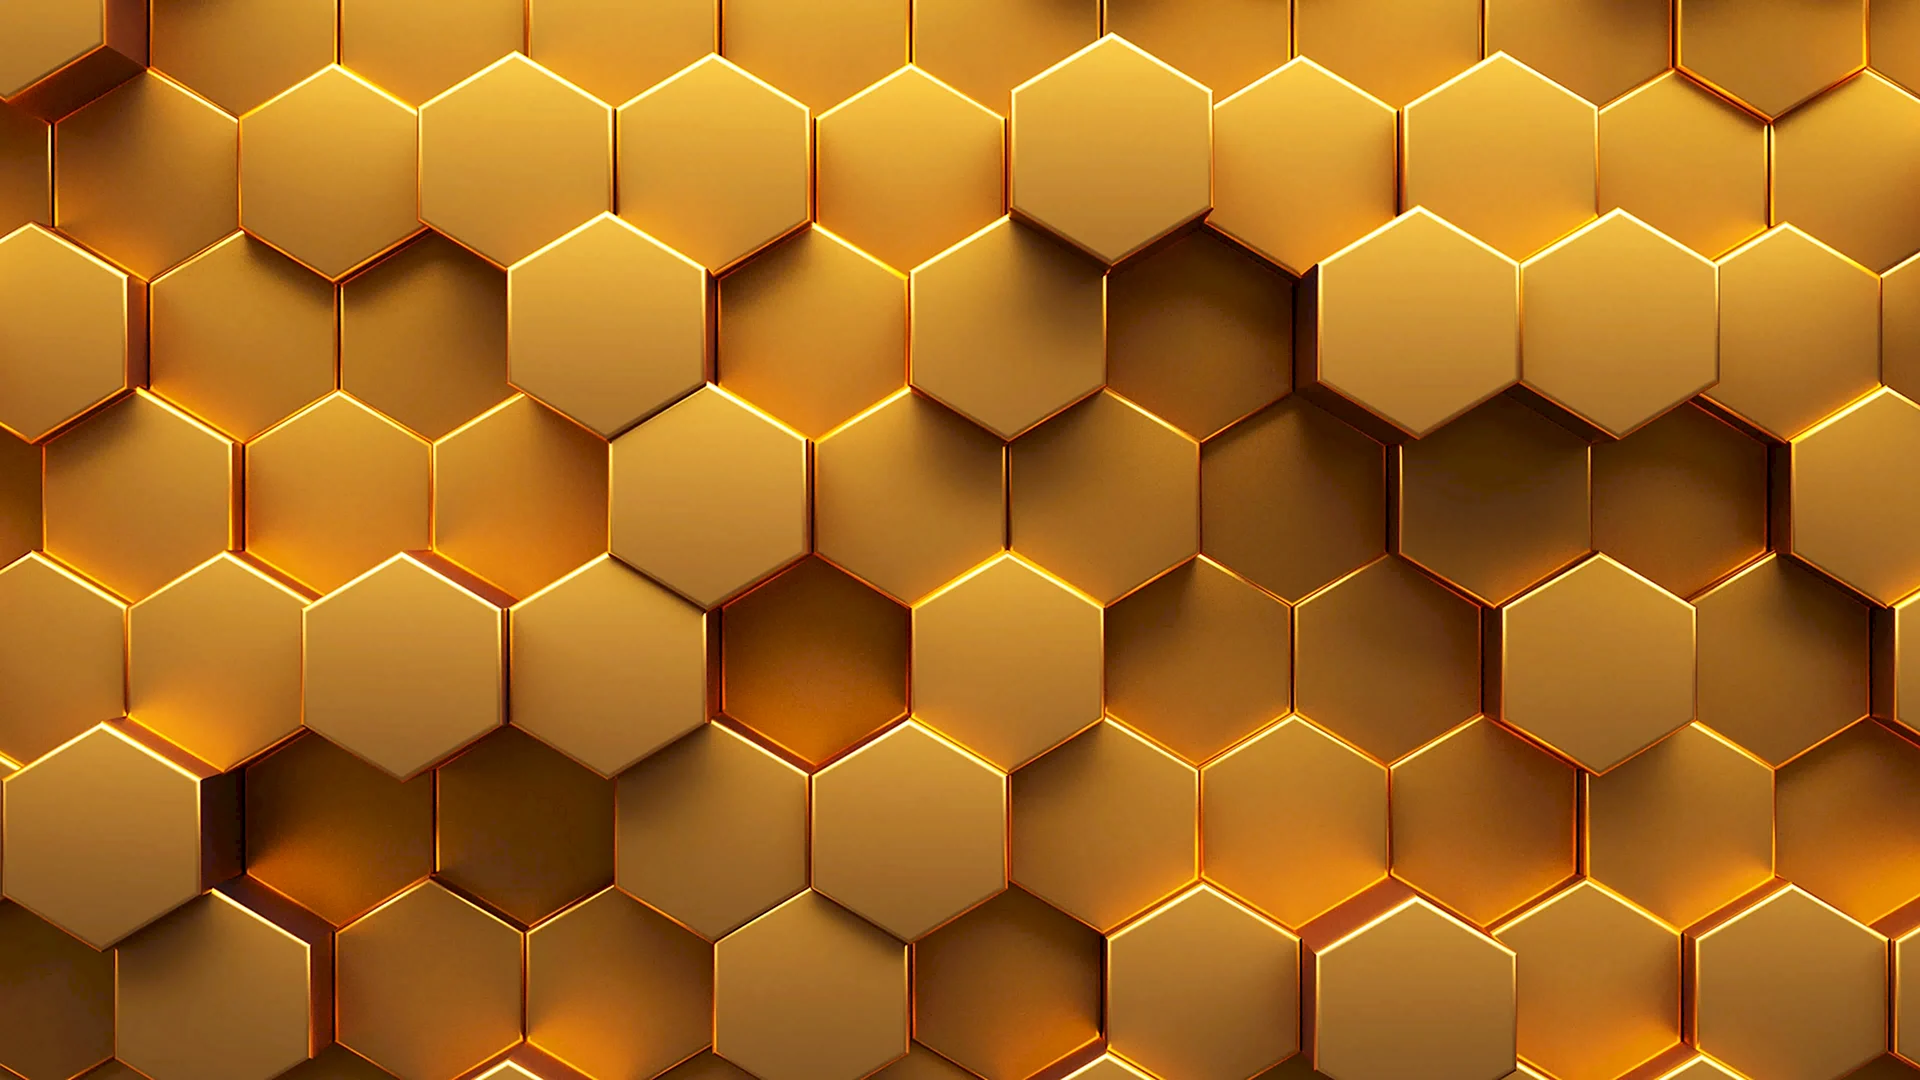 Gold Hexagon abstract image